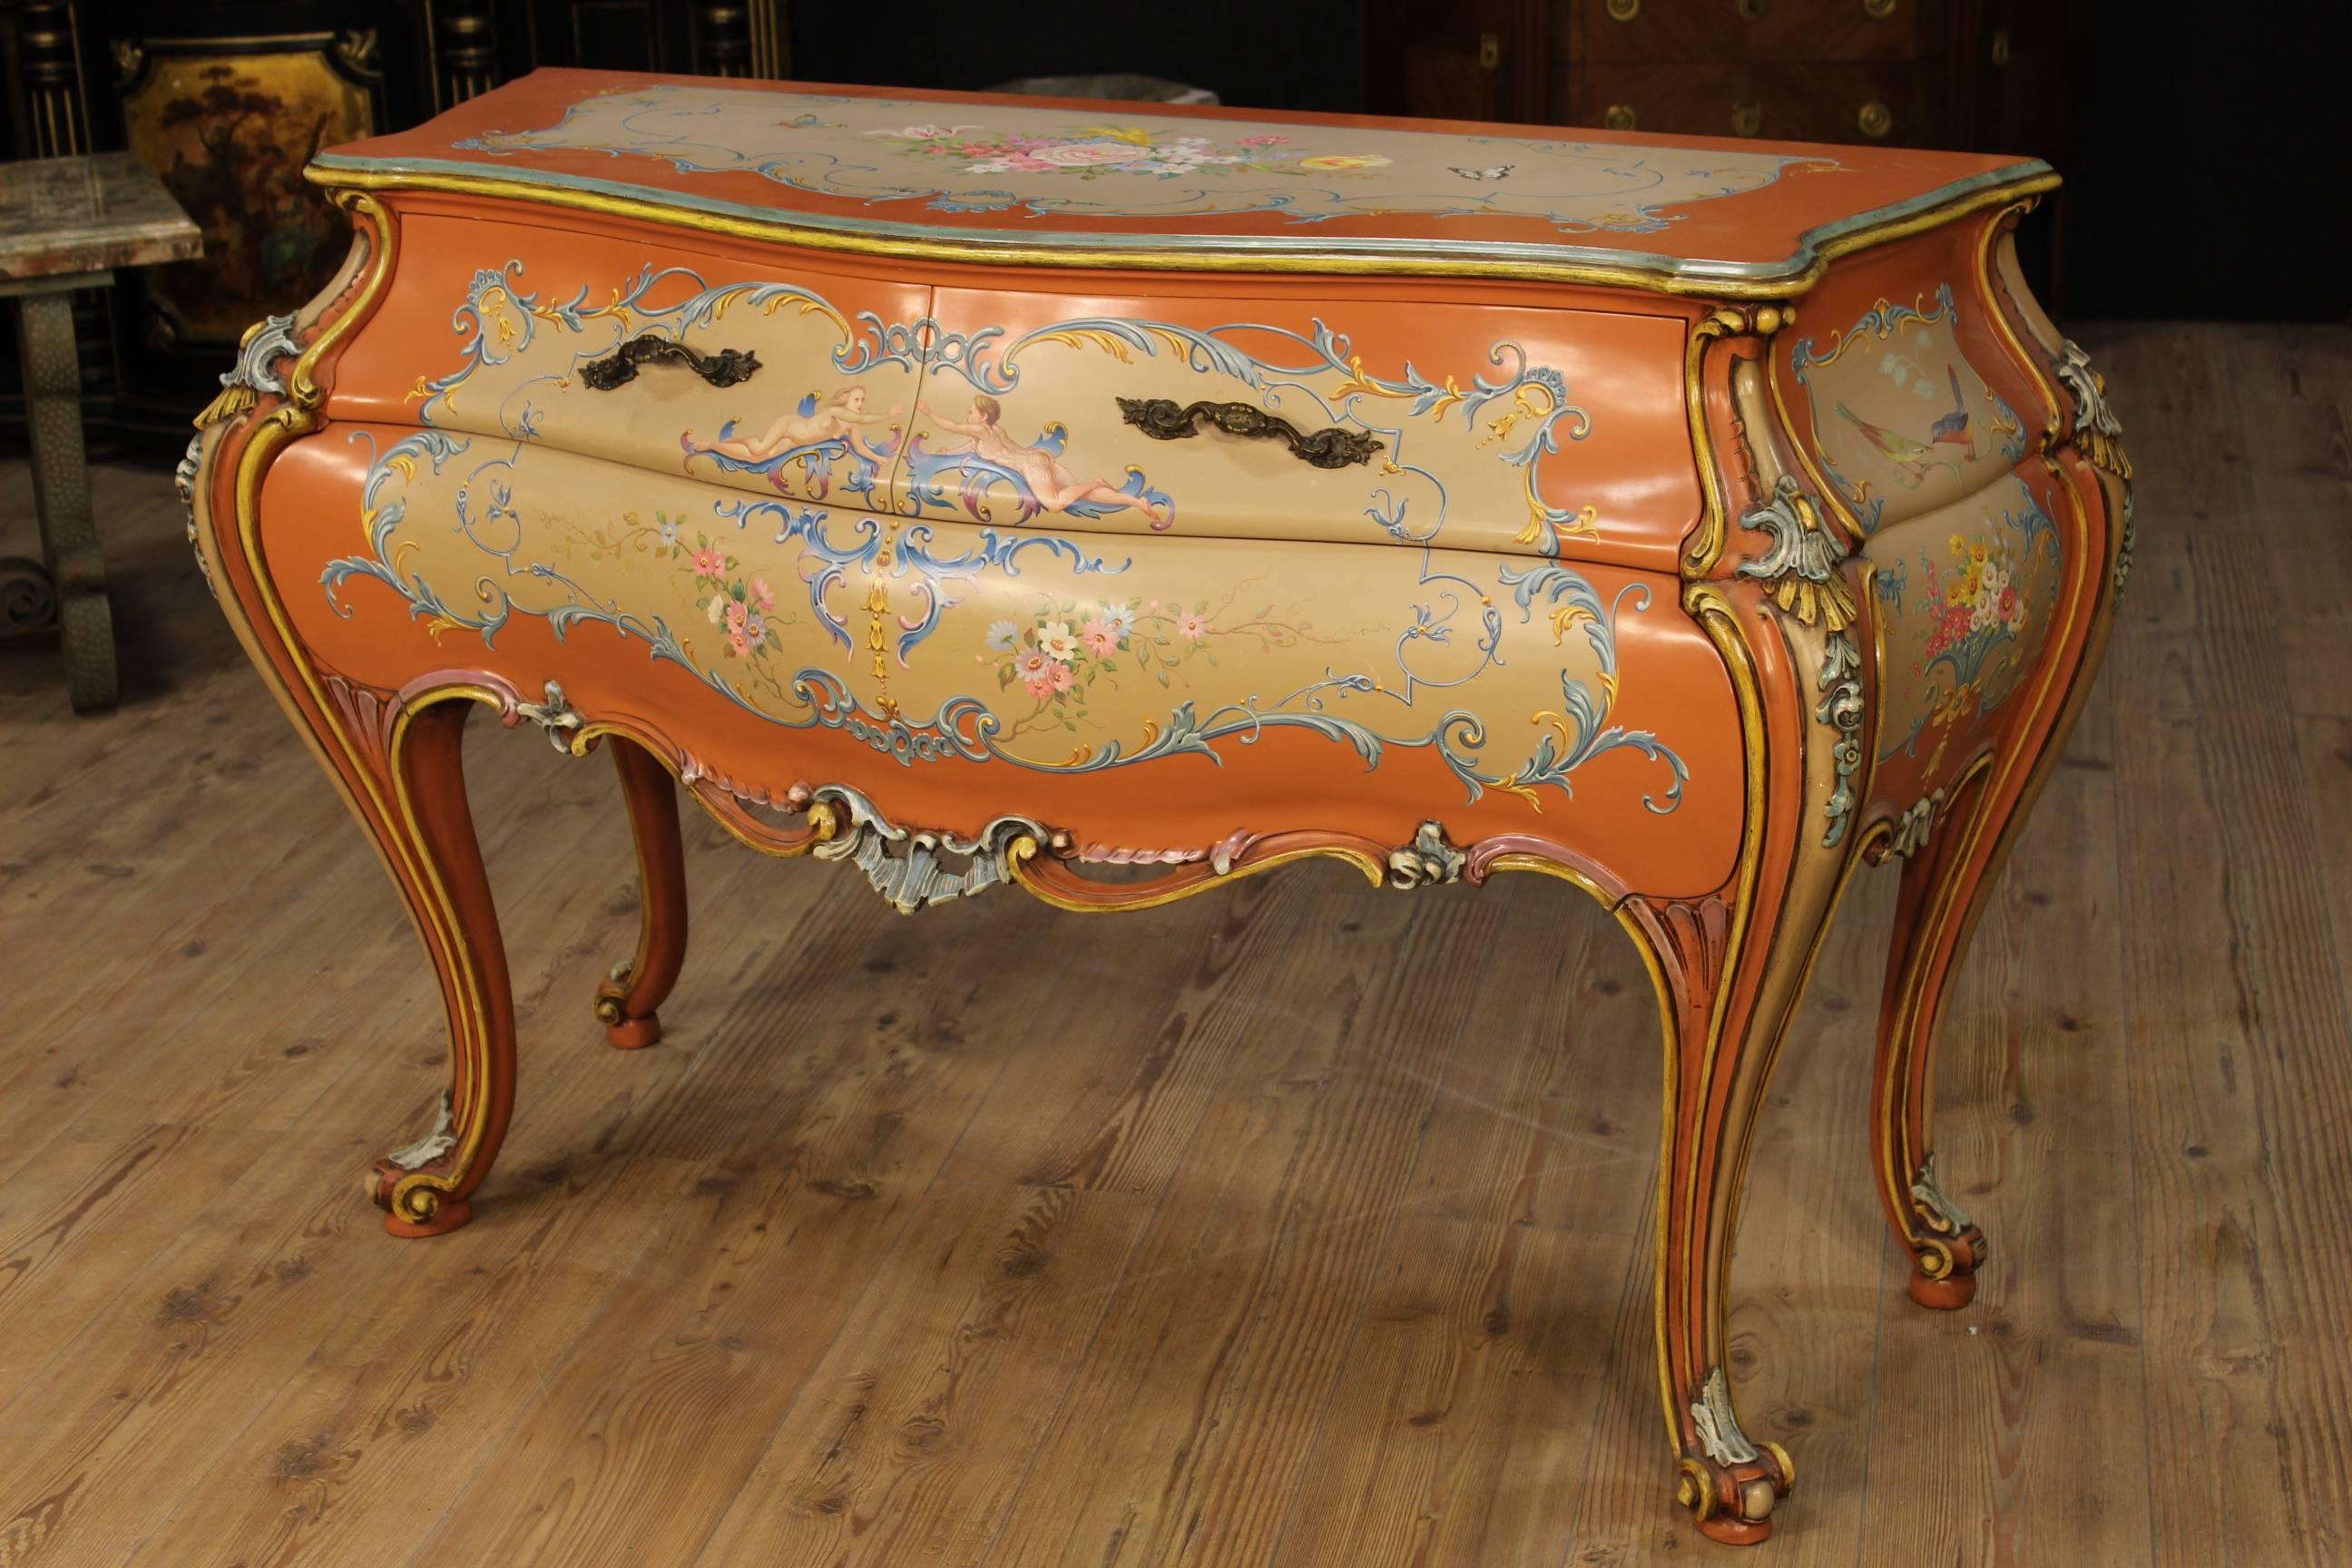 Lacquered Venetian commode. Furniture in ornately carved, lacquered and hand-painted wood with neoclassical decorations and flowers. Dresser with two drawers adorned with chiseled metal handles. Curved commode of the second half of the 20th century.